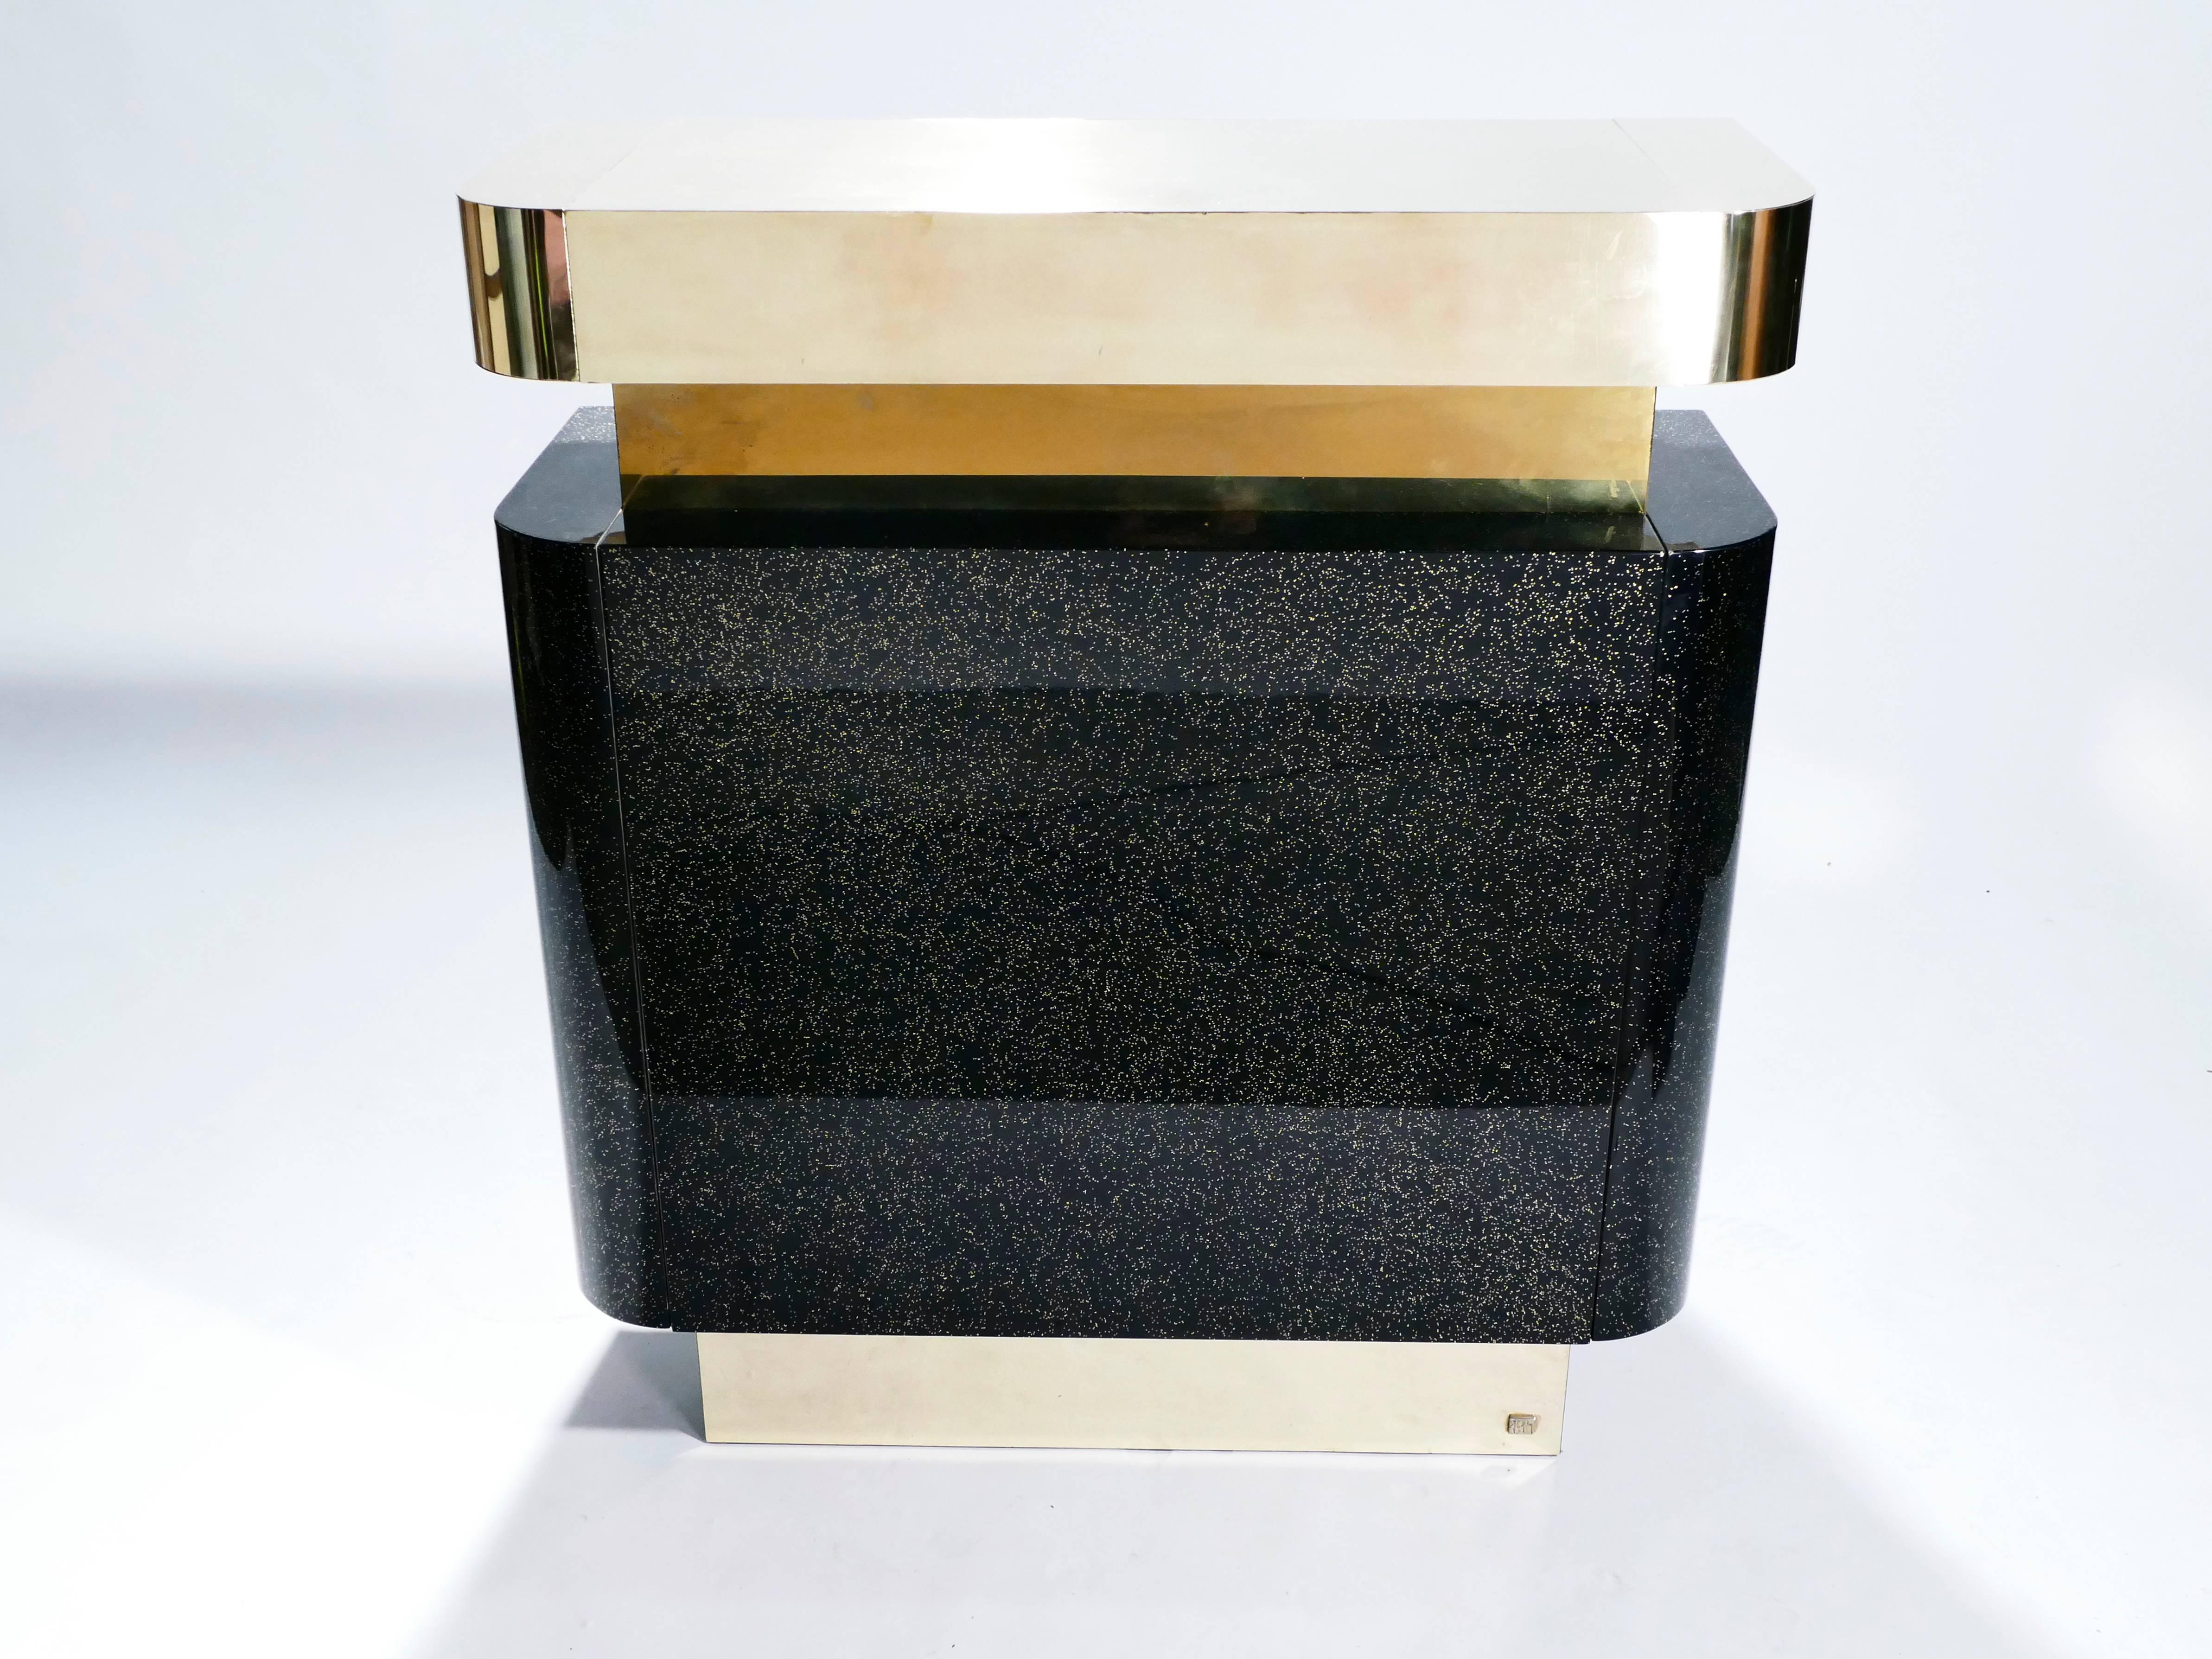 A bar for a standout look. This rare piece was designed by lighting and furniture designer Jean-Claude Mahey in the 1970s for firm Maison Romeo and displays all the trademark glam of the period. Brass and black lacquer are used in large, chunky